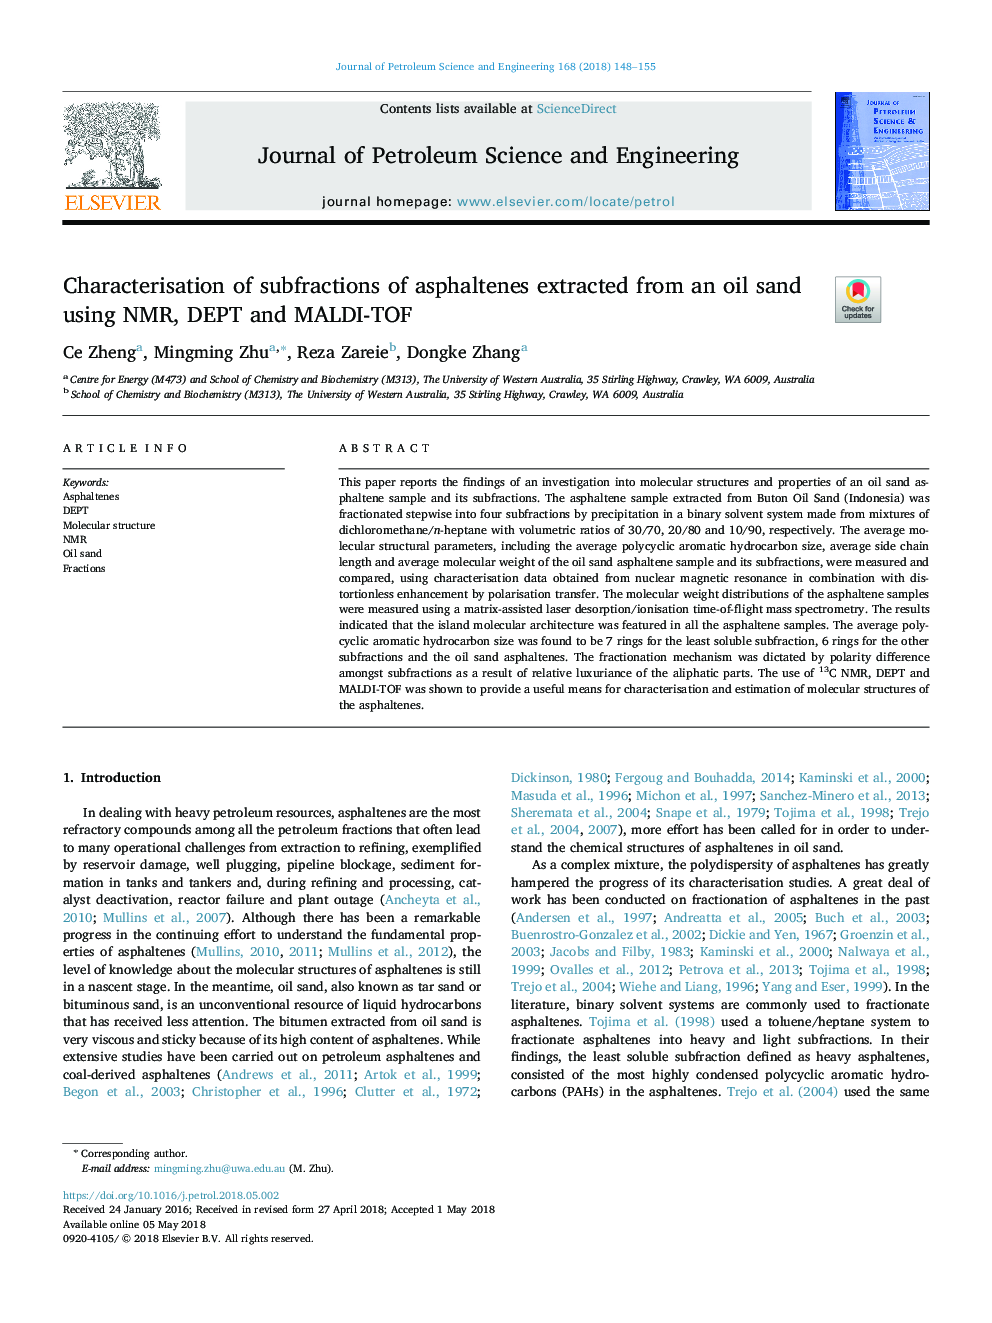 Characterisation of subfractions of asphaltenes extracted from an oil sand using NMR, DEPT and MALDI-TOF